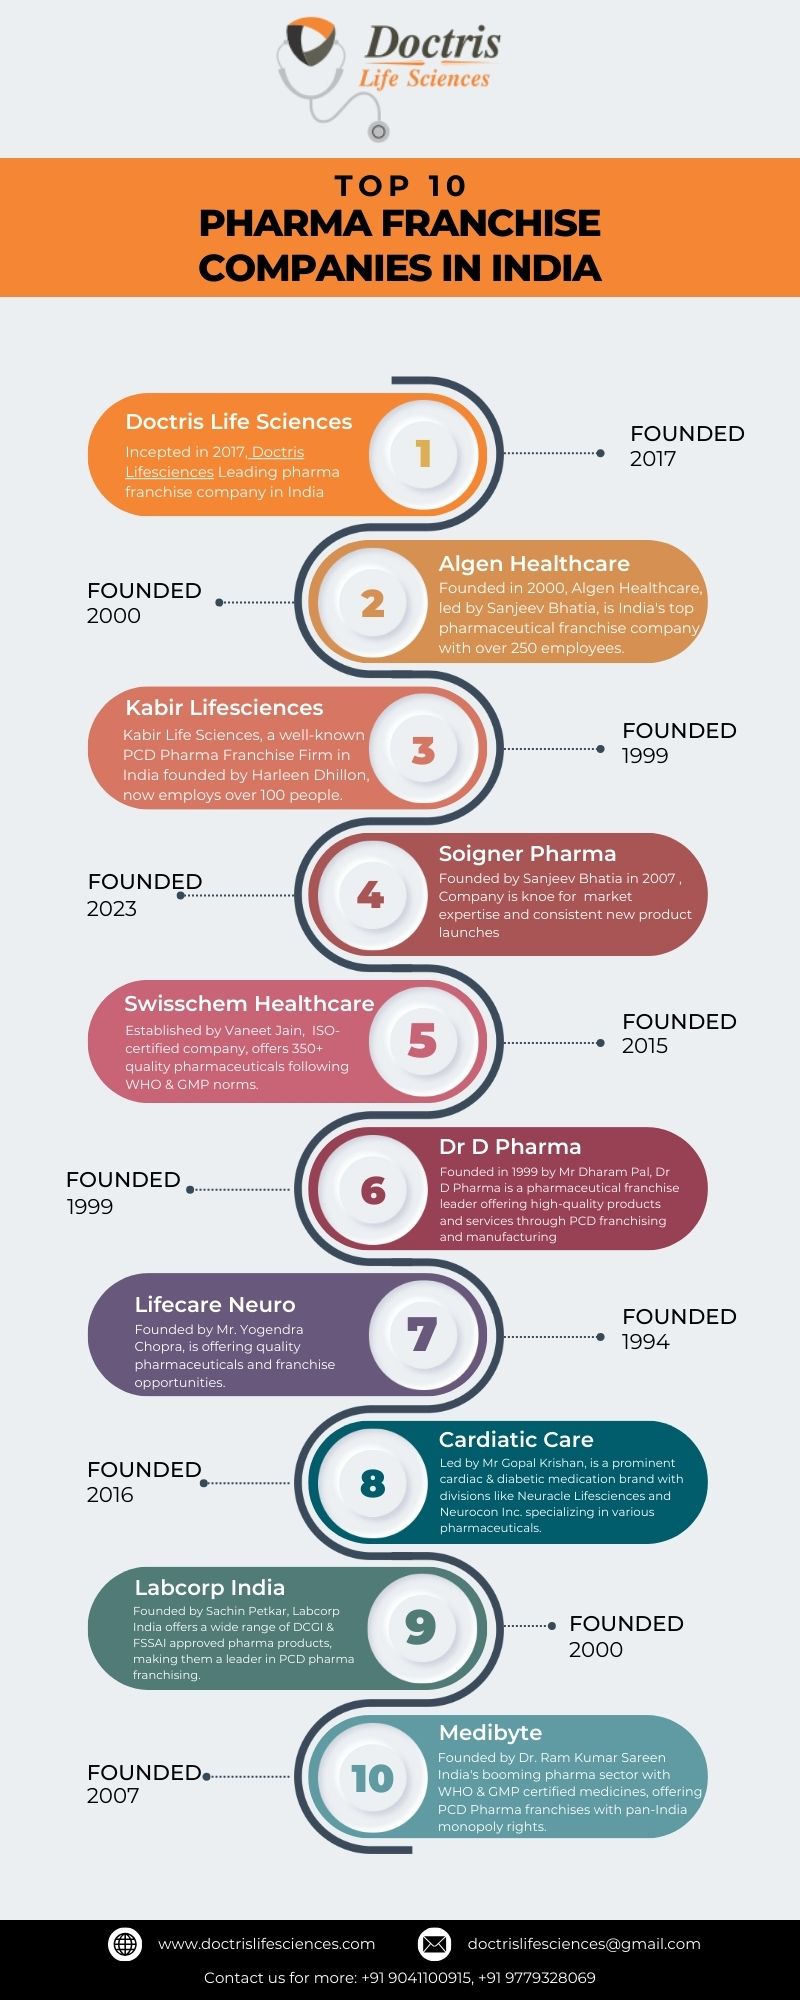 Top 10 Pharma Franchise Companies In India Infographic